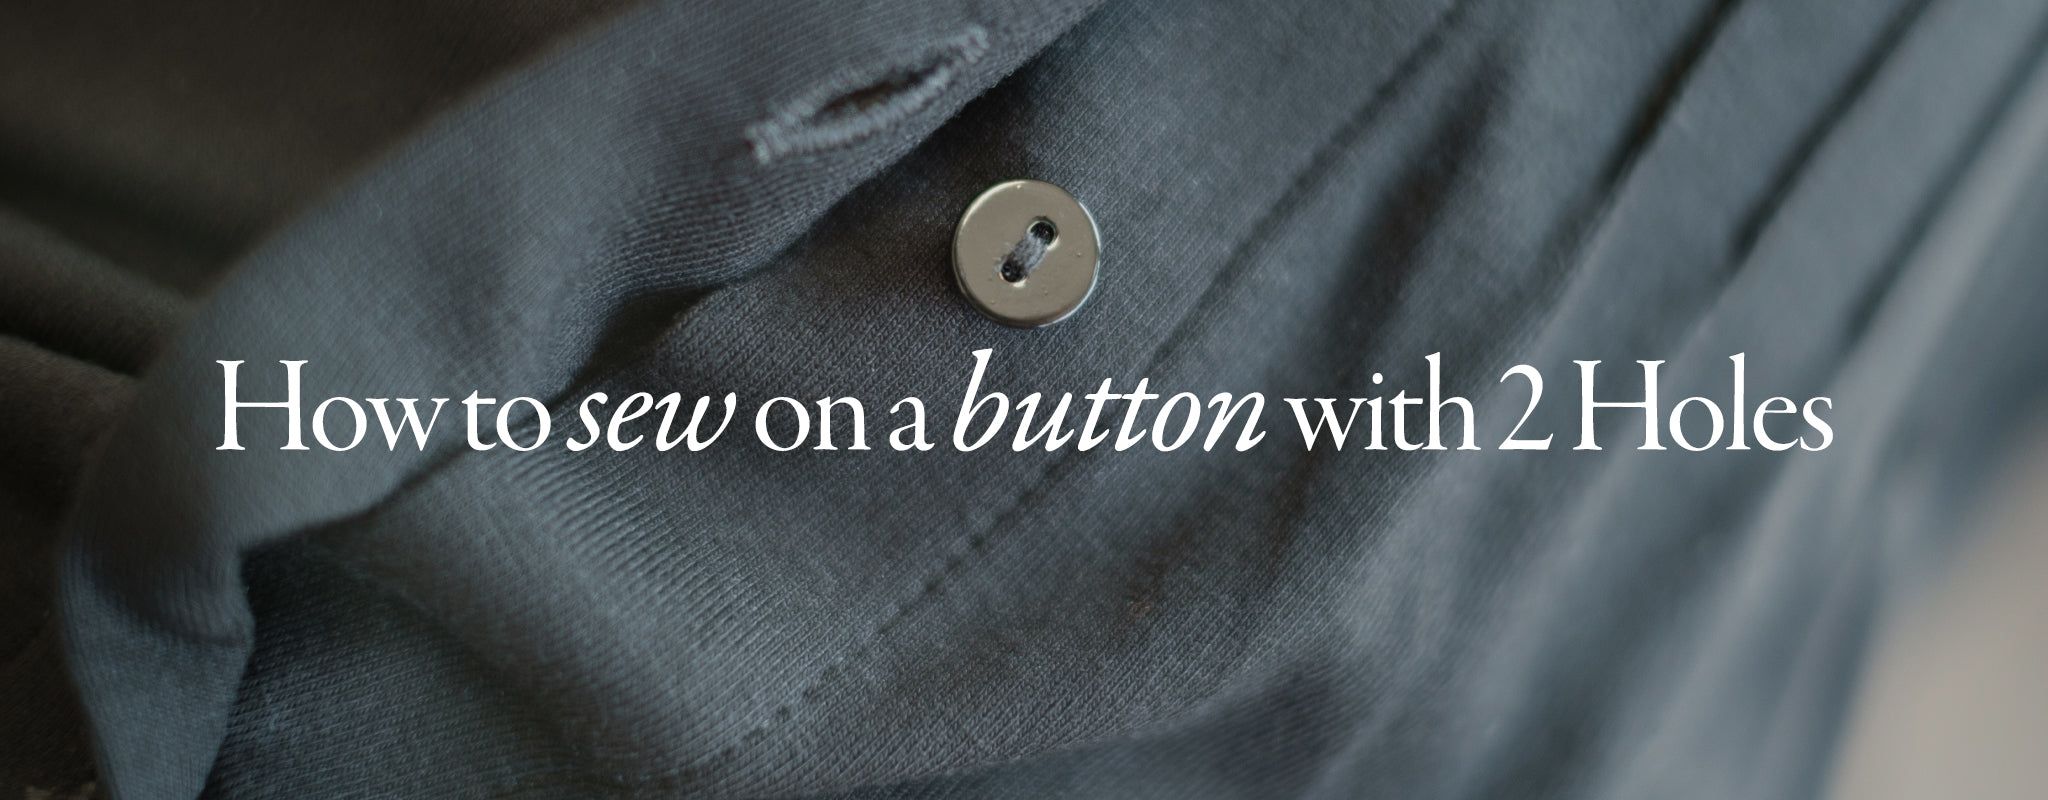 How to sew on a button with 2 holes – Baukjen